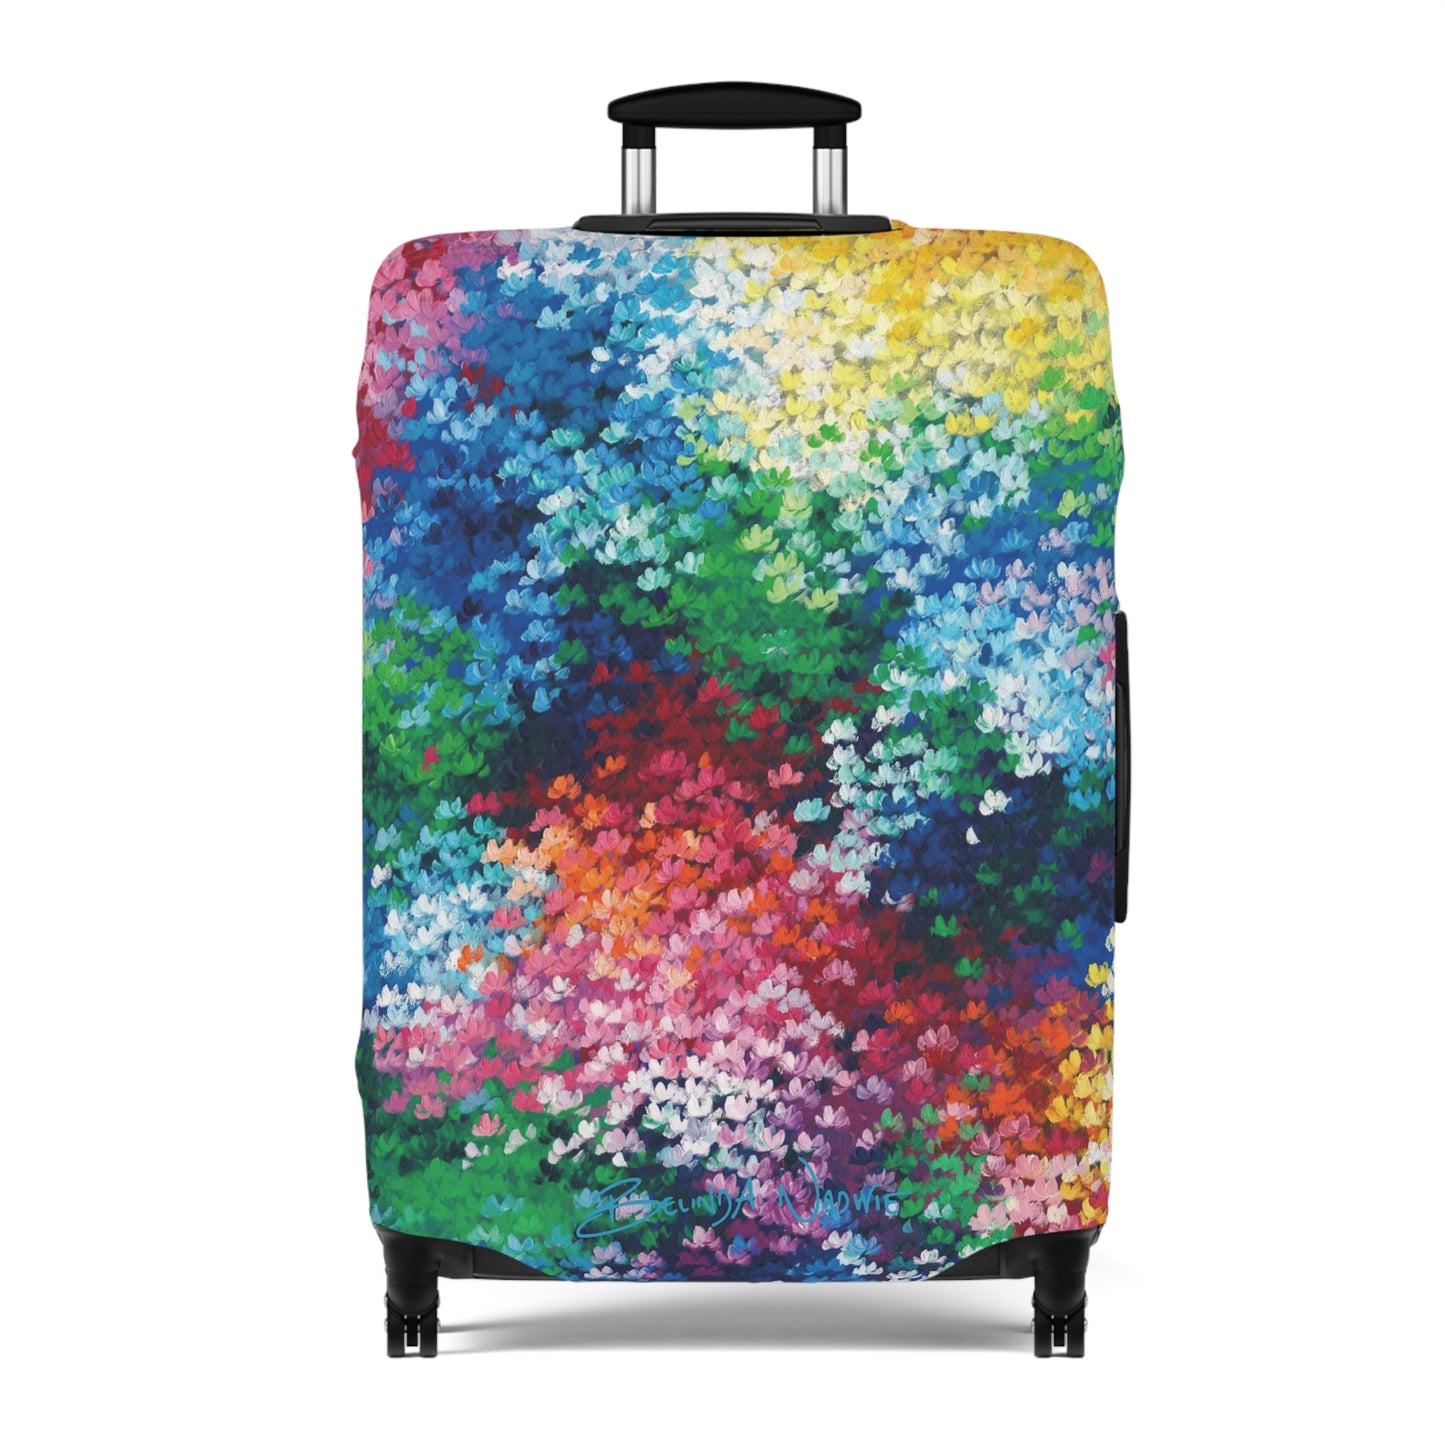 All About Us Luggage Cover